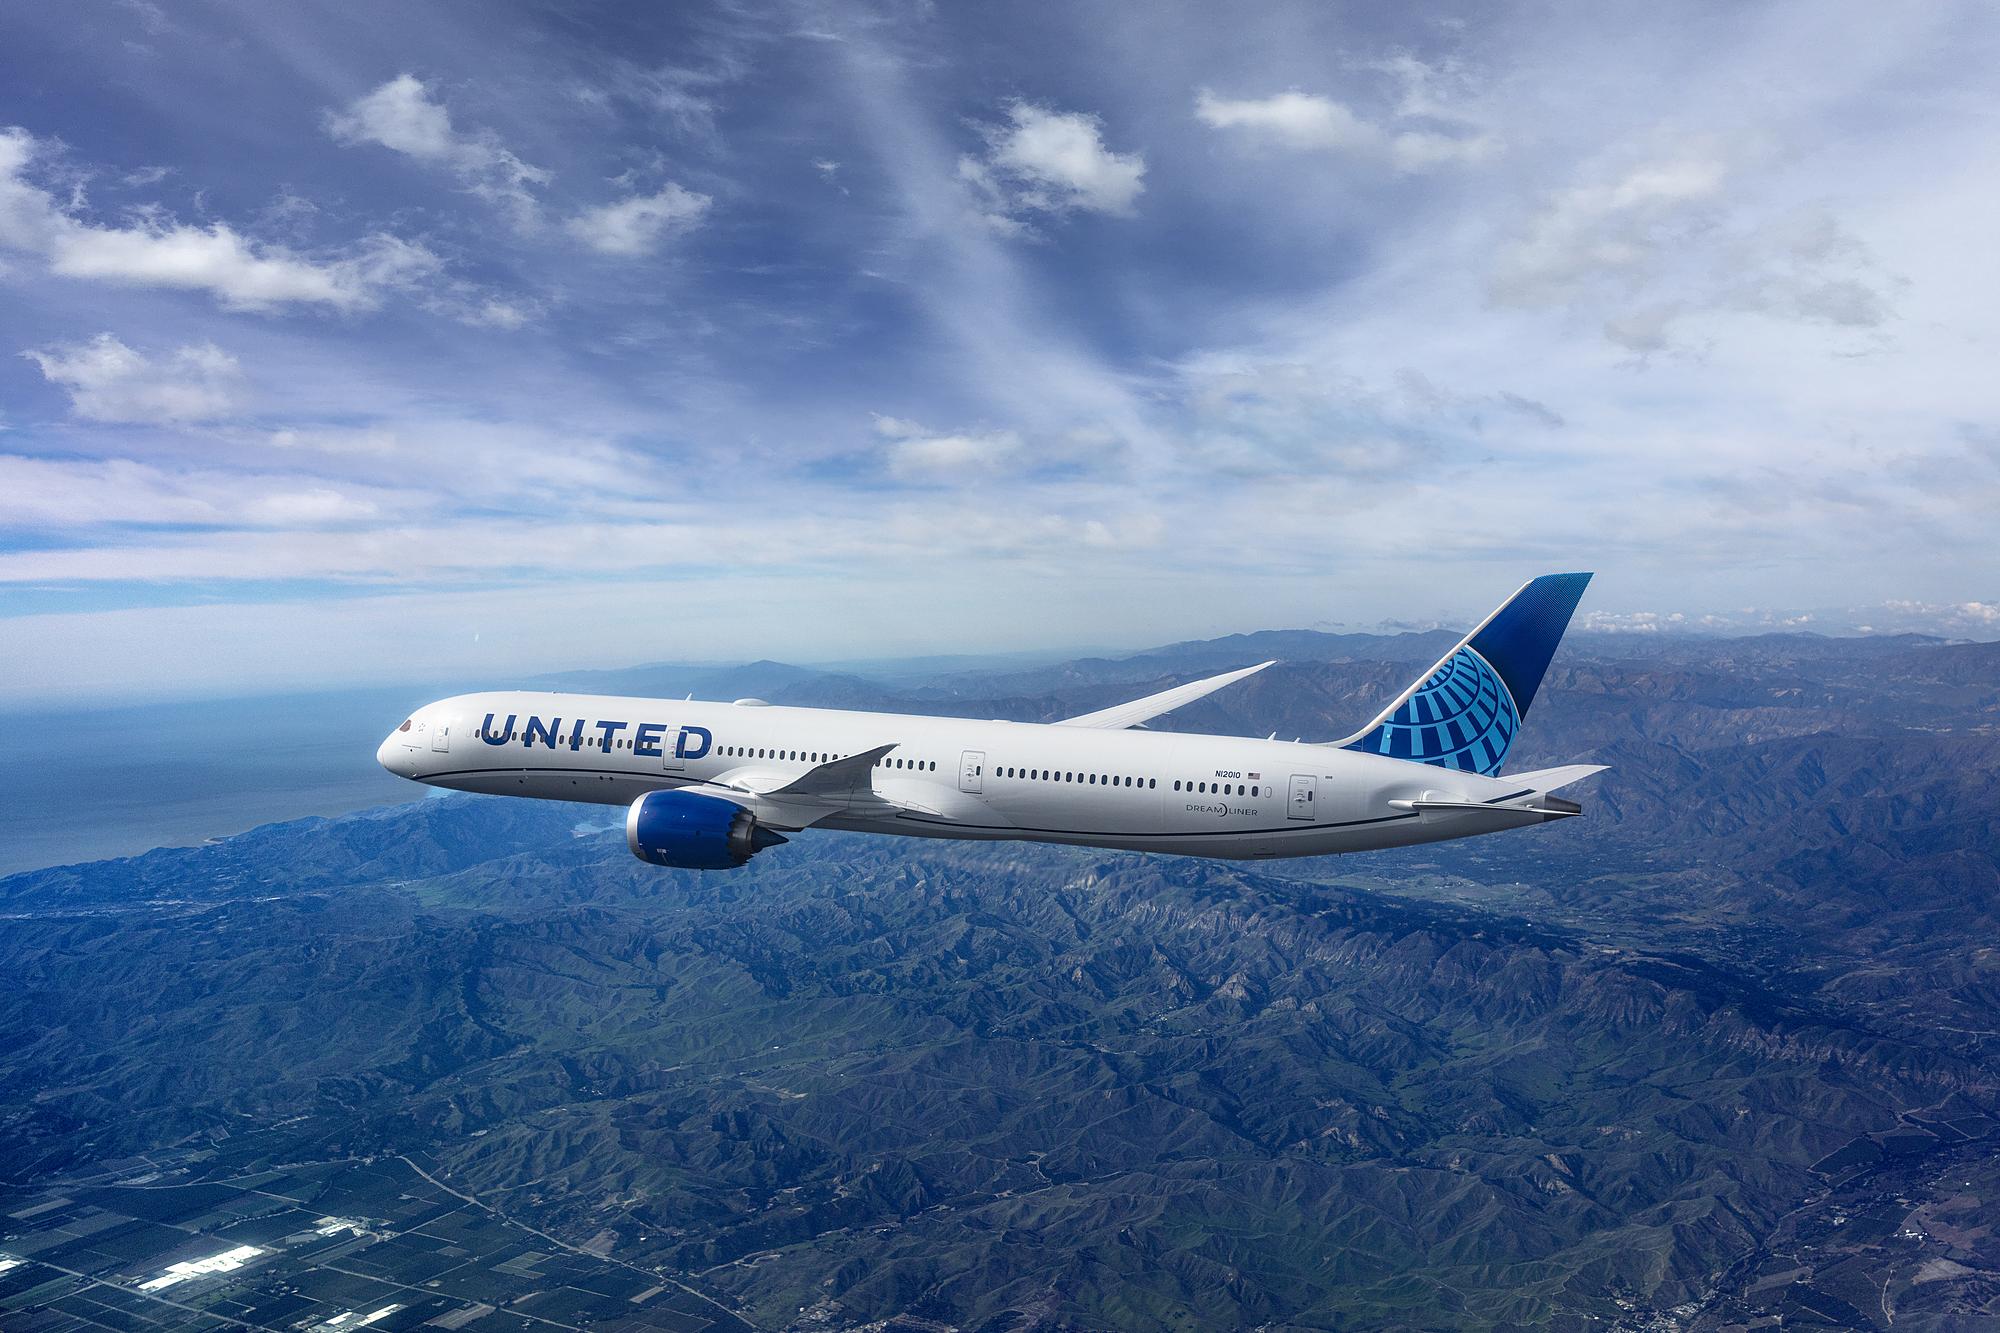 Airlines united United, American